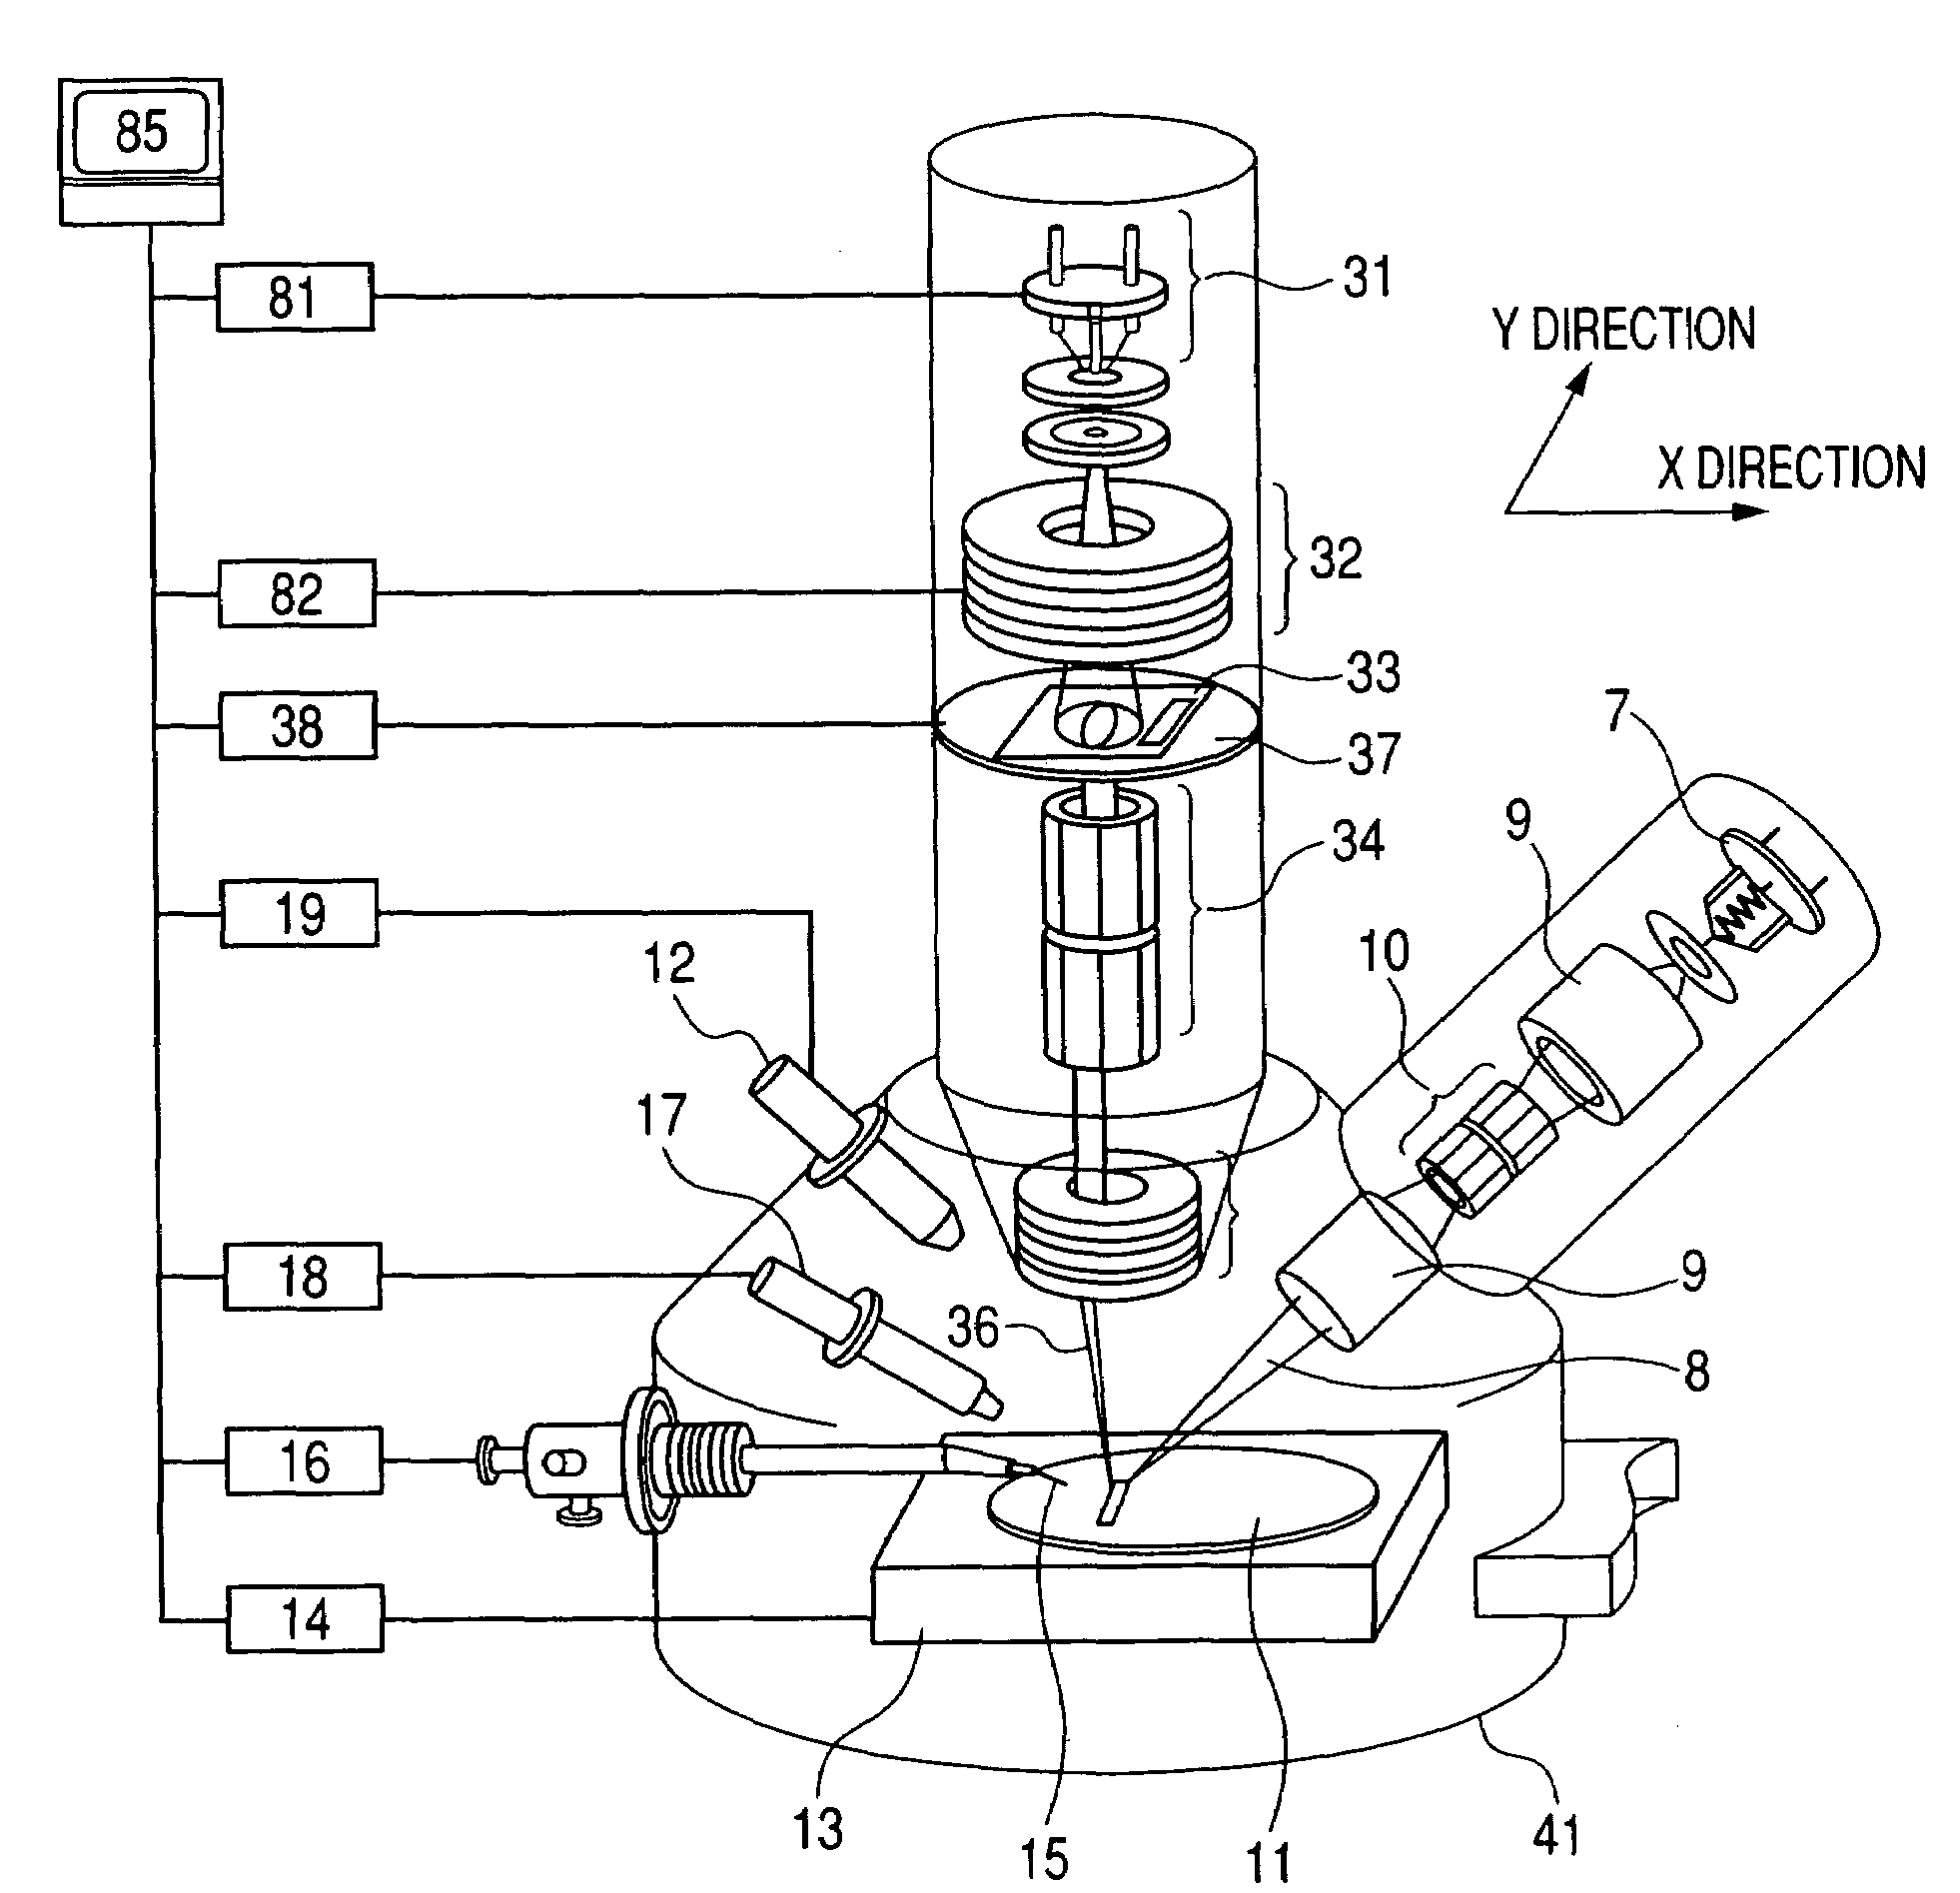 Ion beam system and machining method